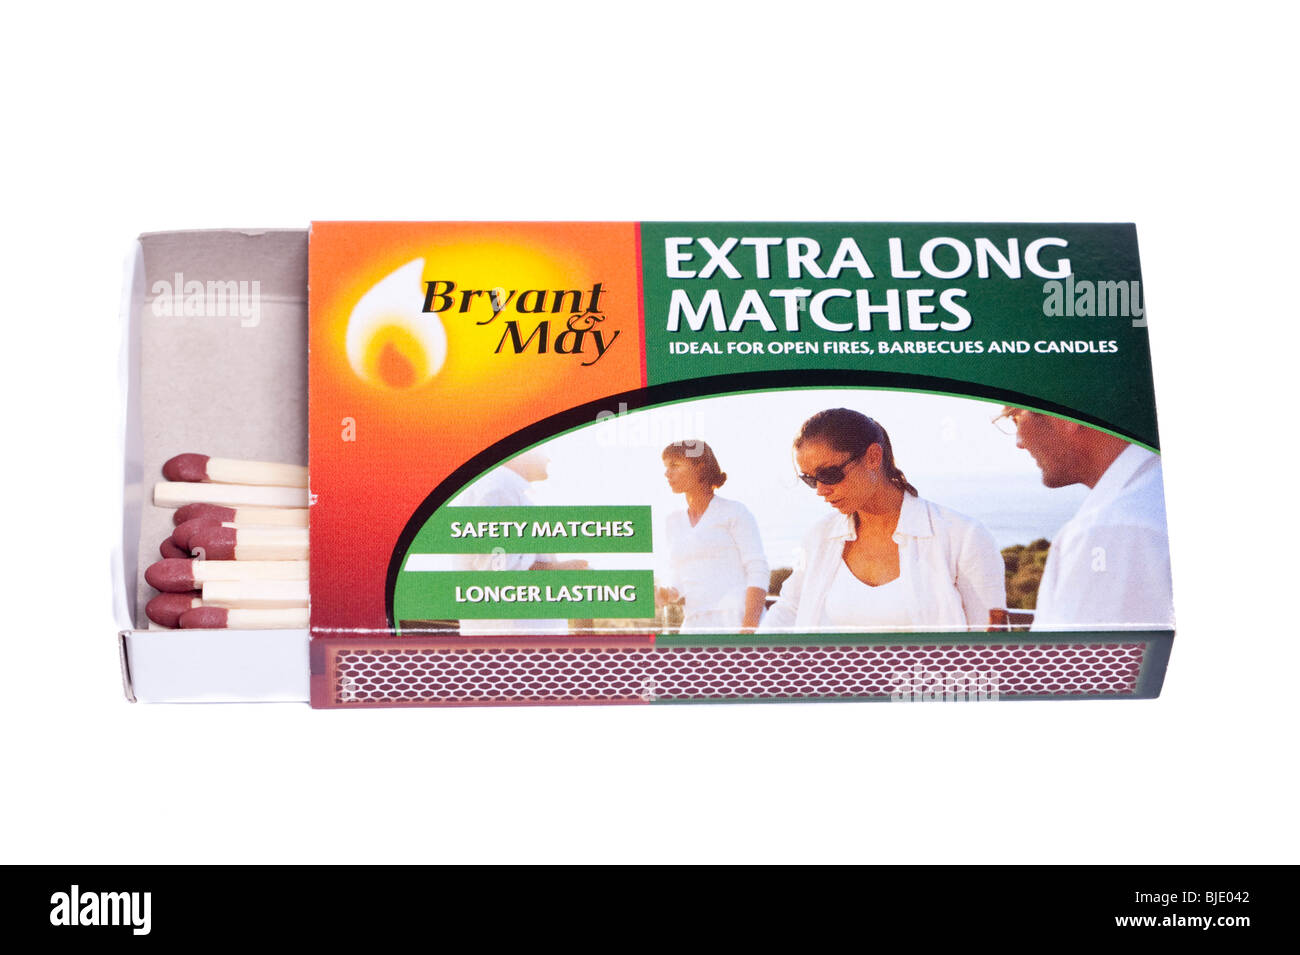 A box of Bryant & May extra long matches for lighting fires etc. on a white background Stock Photo